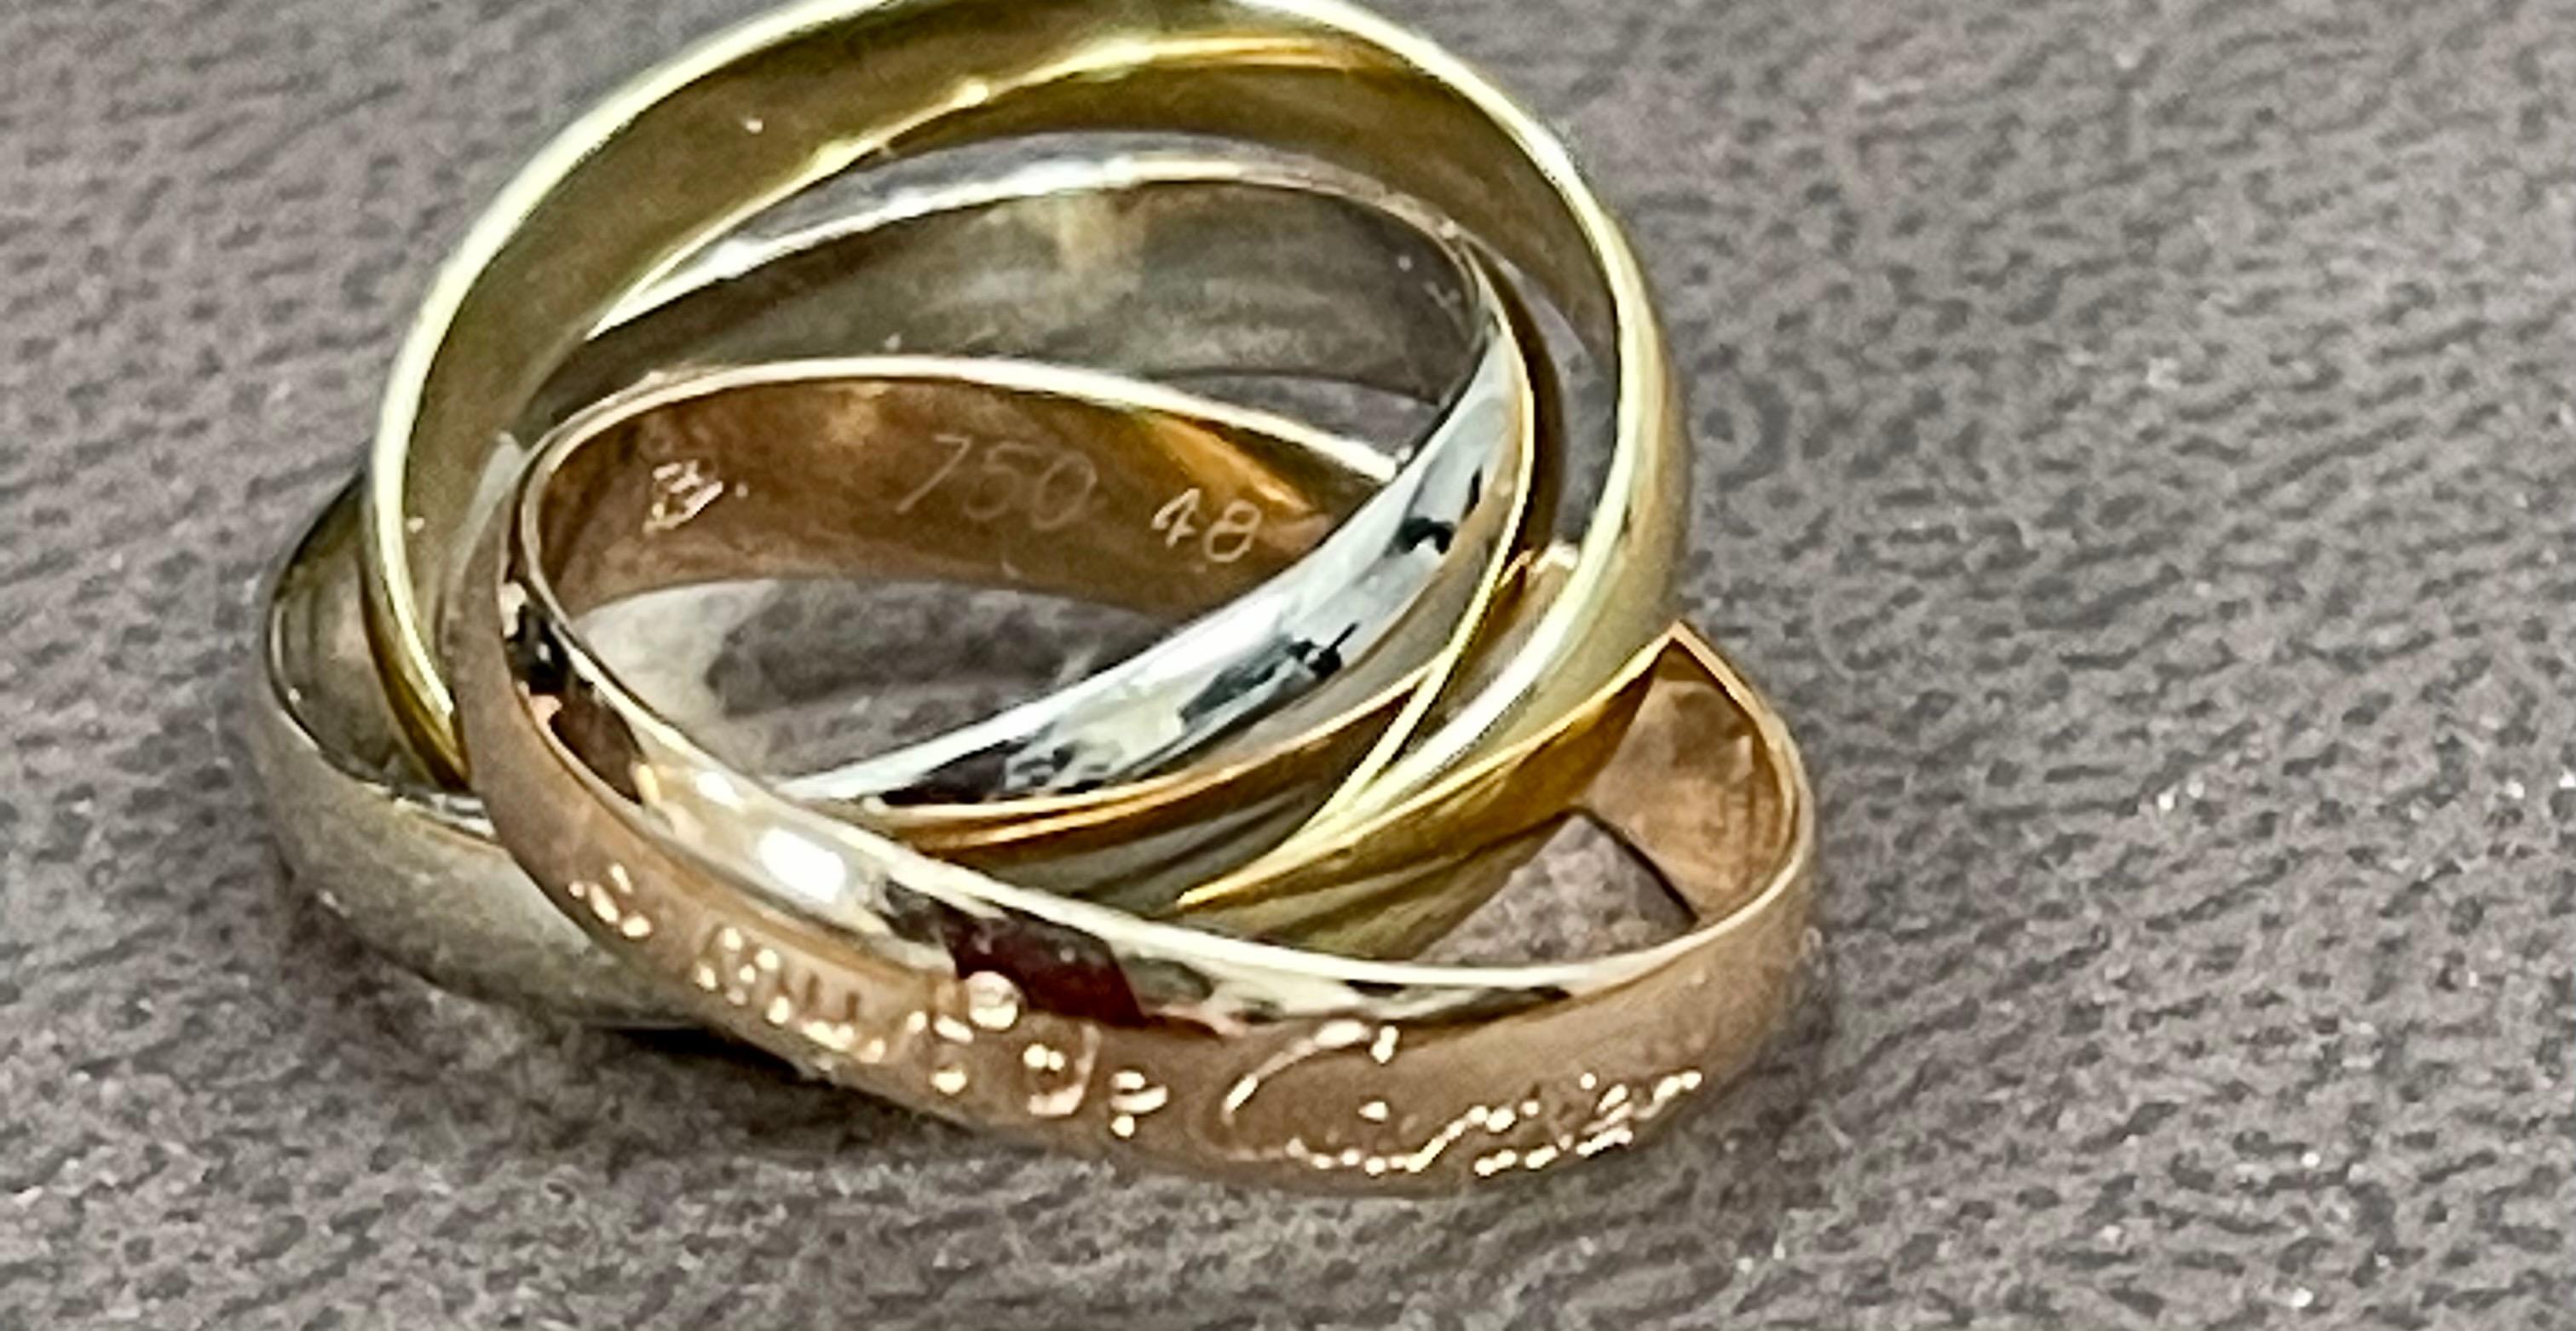 This Cartier Trinity Ring is the classic three band rolling ring. 
Cartier Trinity de Cartier Tri-Color 18k Gold Ring
Ring Size	4.5 , very small ring
Marked 750, 48
Materials	18k Yellow Gold, White Gold and Rose Gold
Measurements	Each ring is